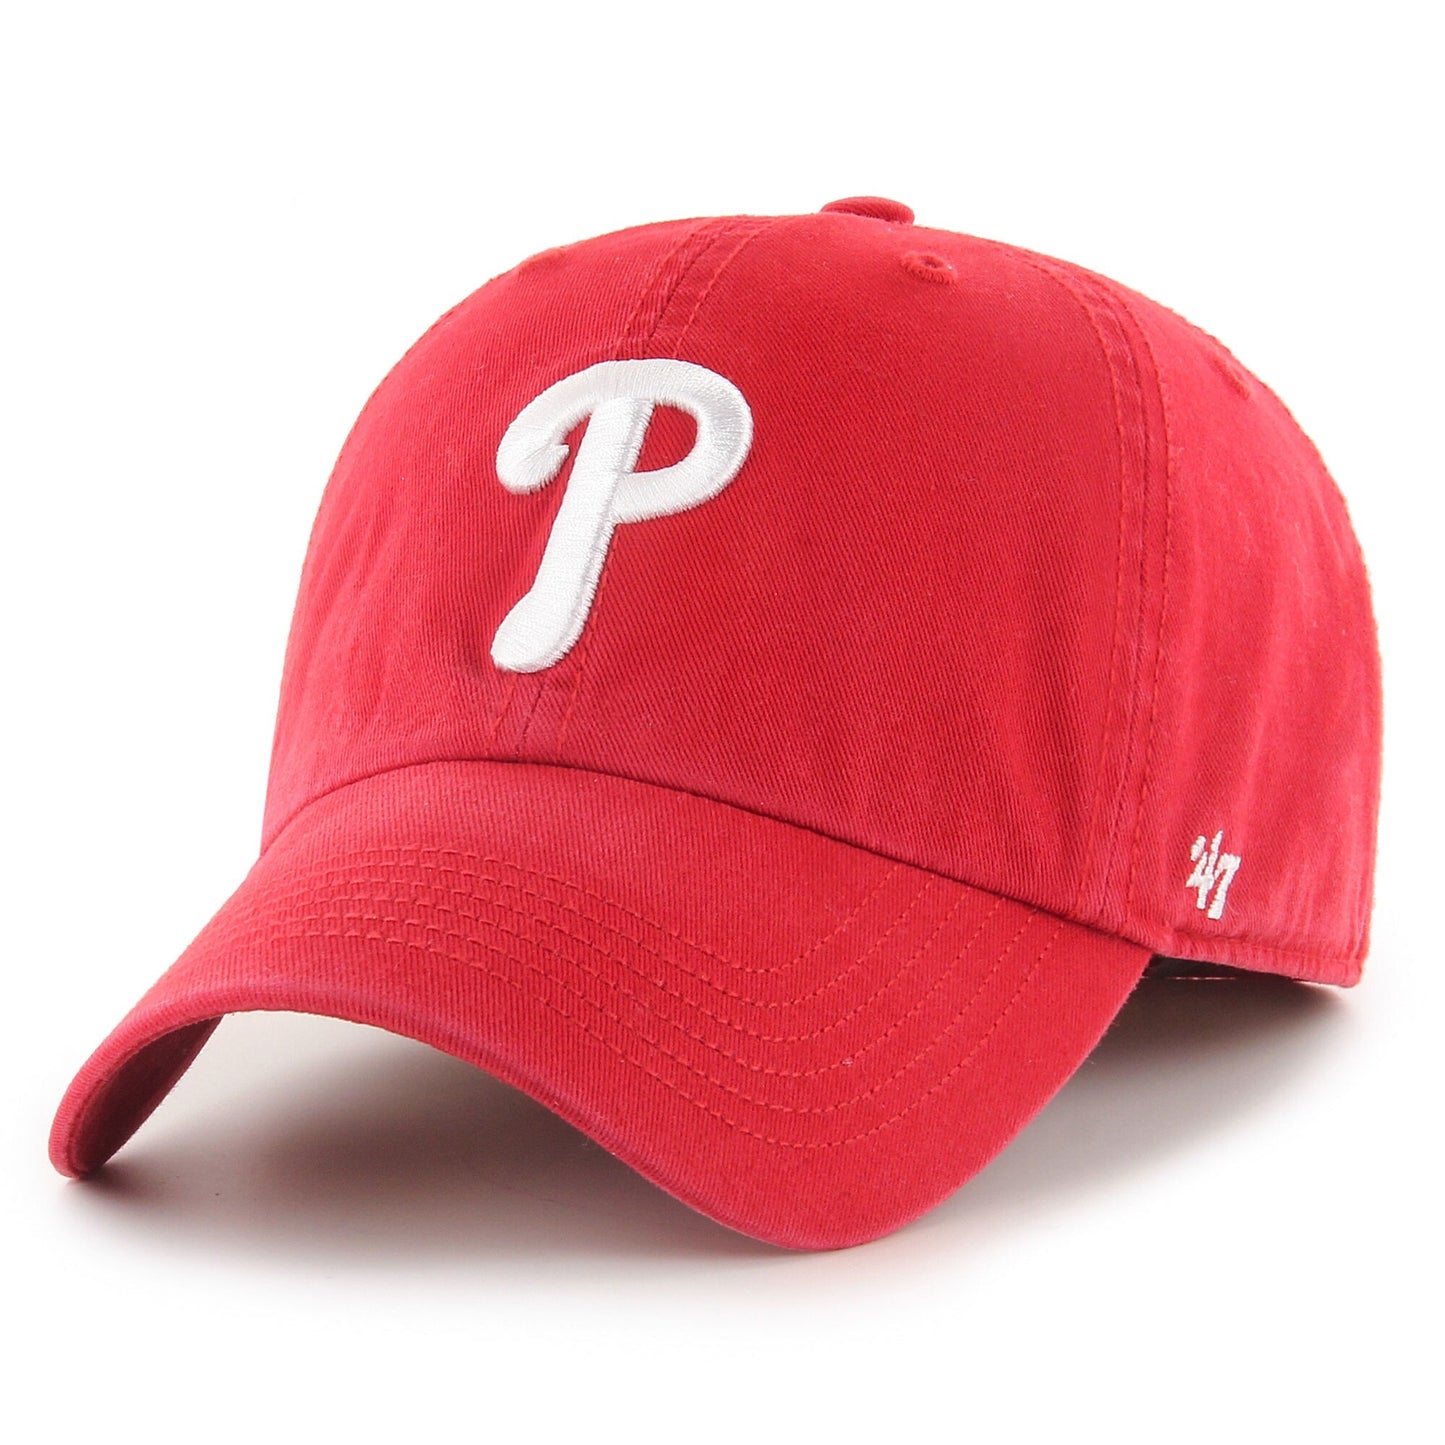 Philadelphia Phillies '47 Franchise Logo Fitted Hat - Red